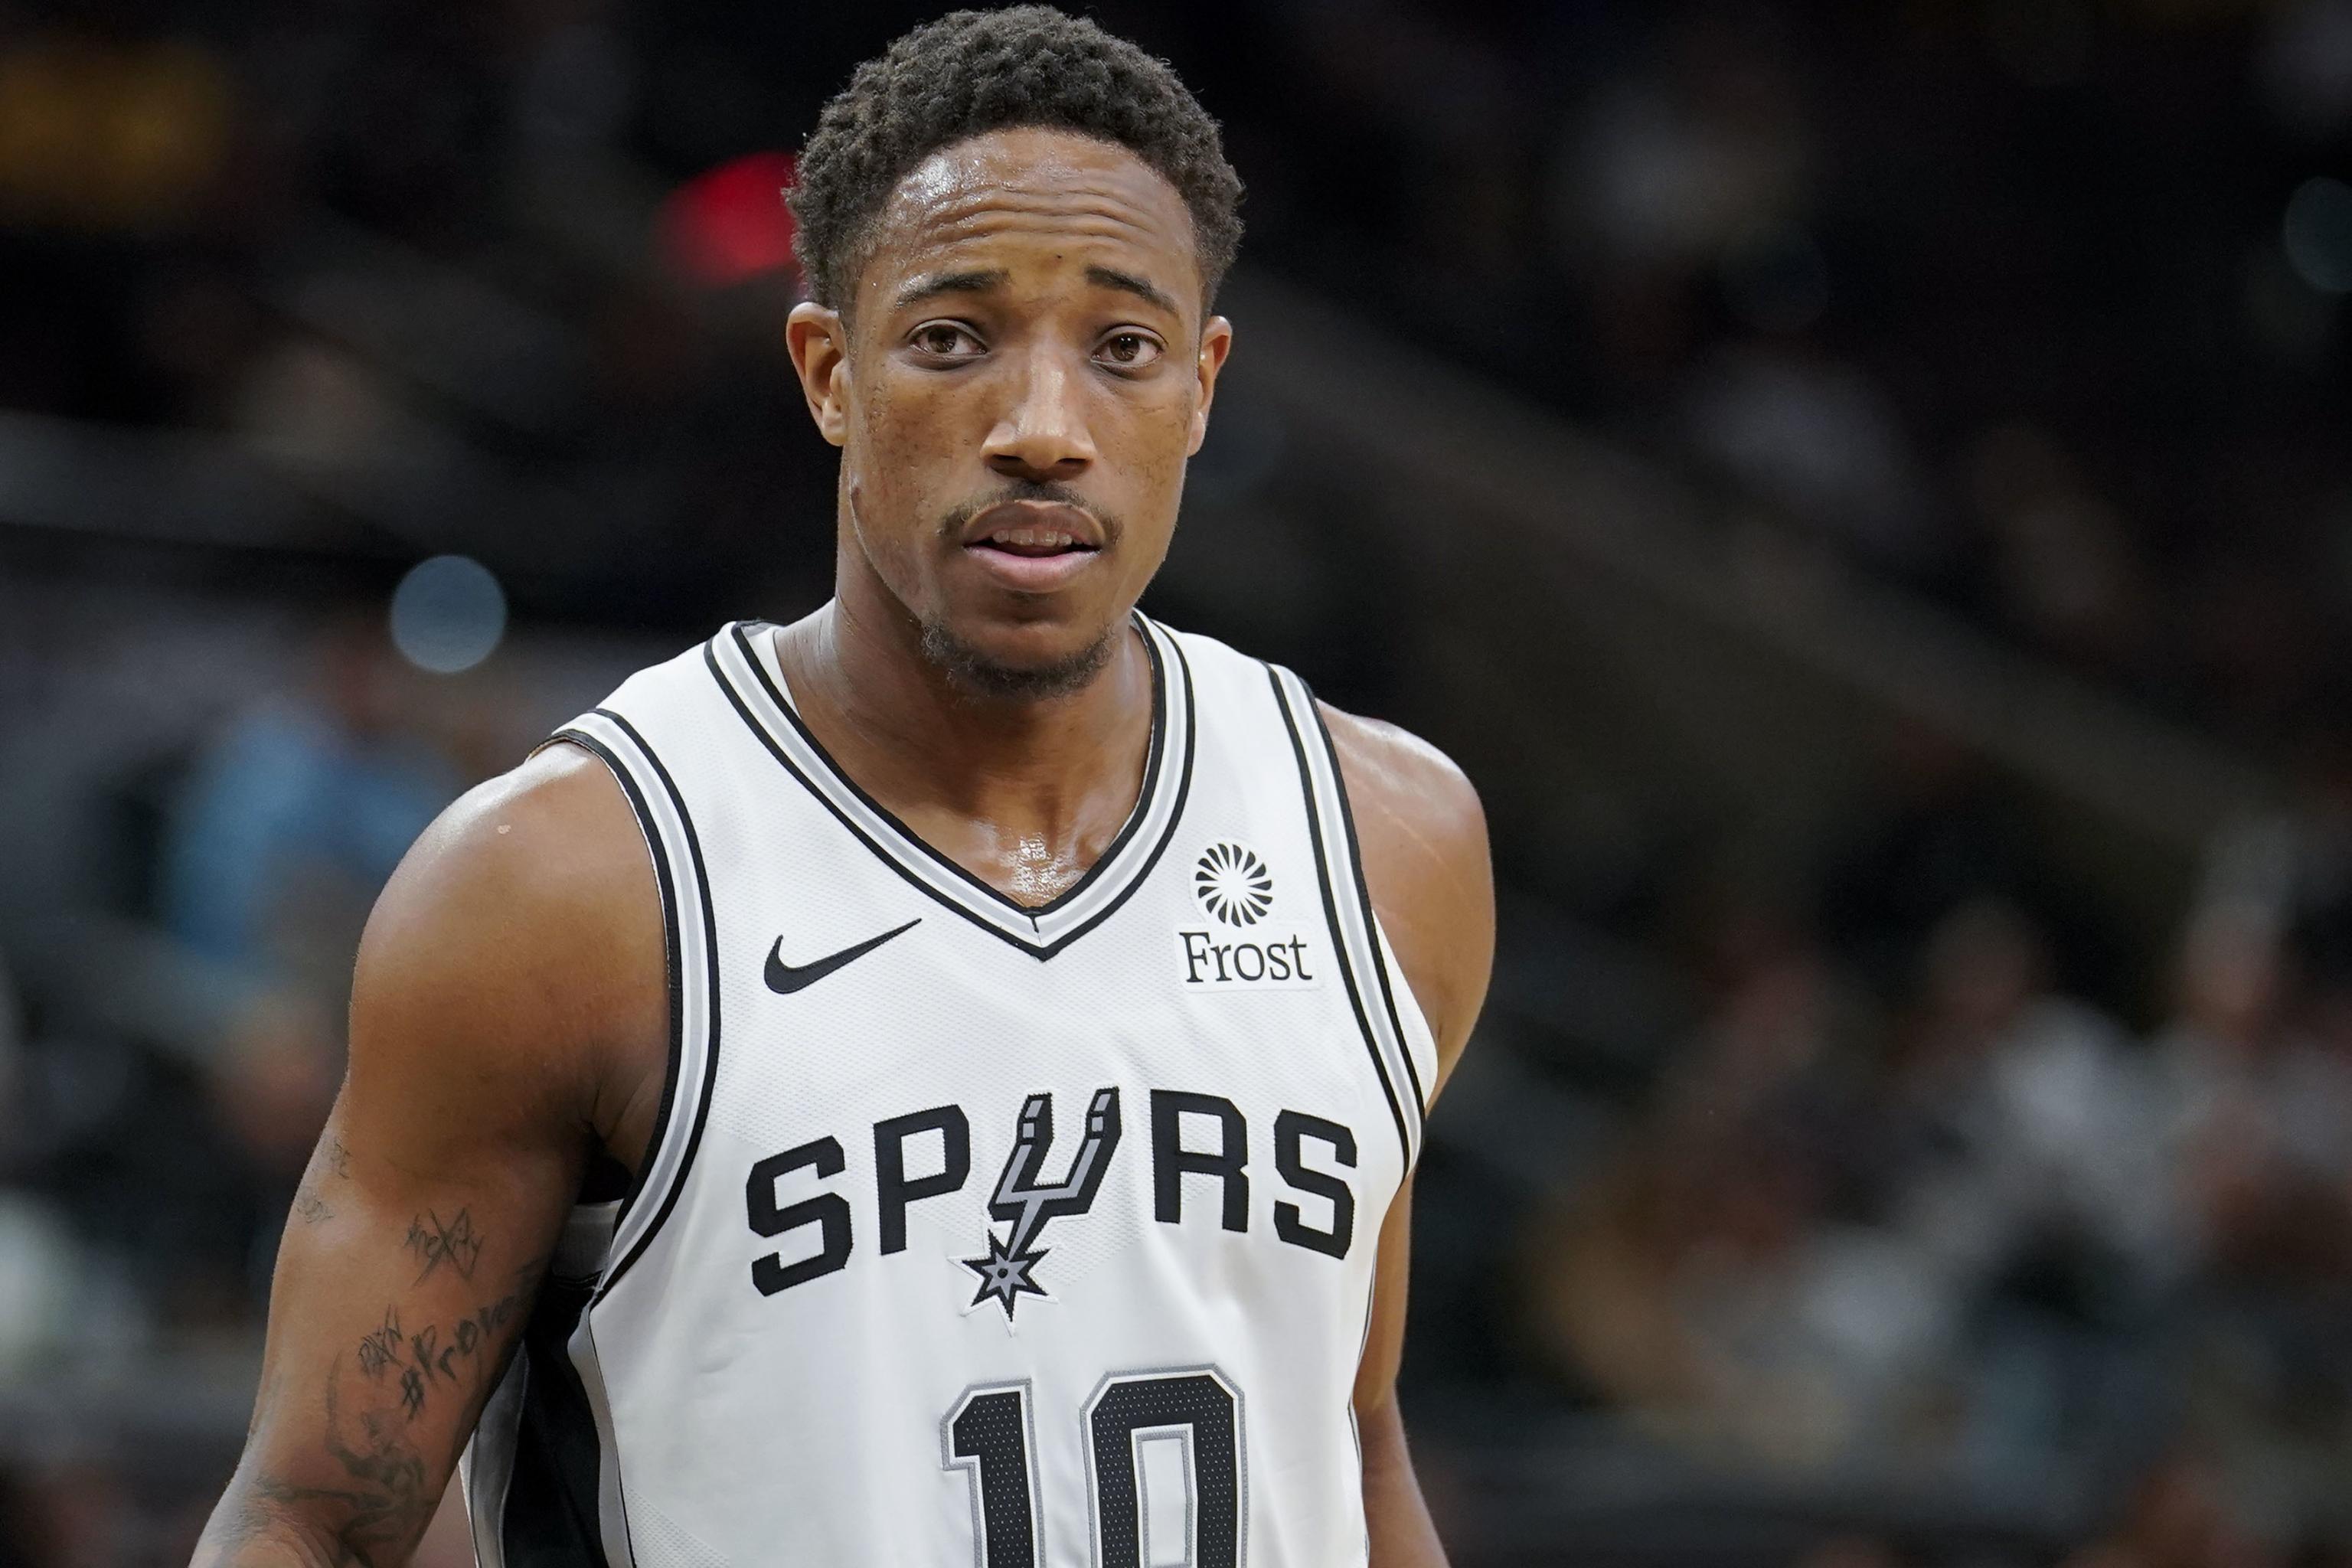 DeMar DeRozan talks about being traded by the Raptors: At the end